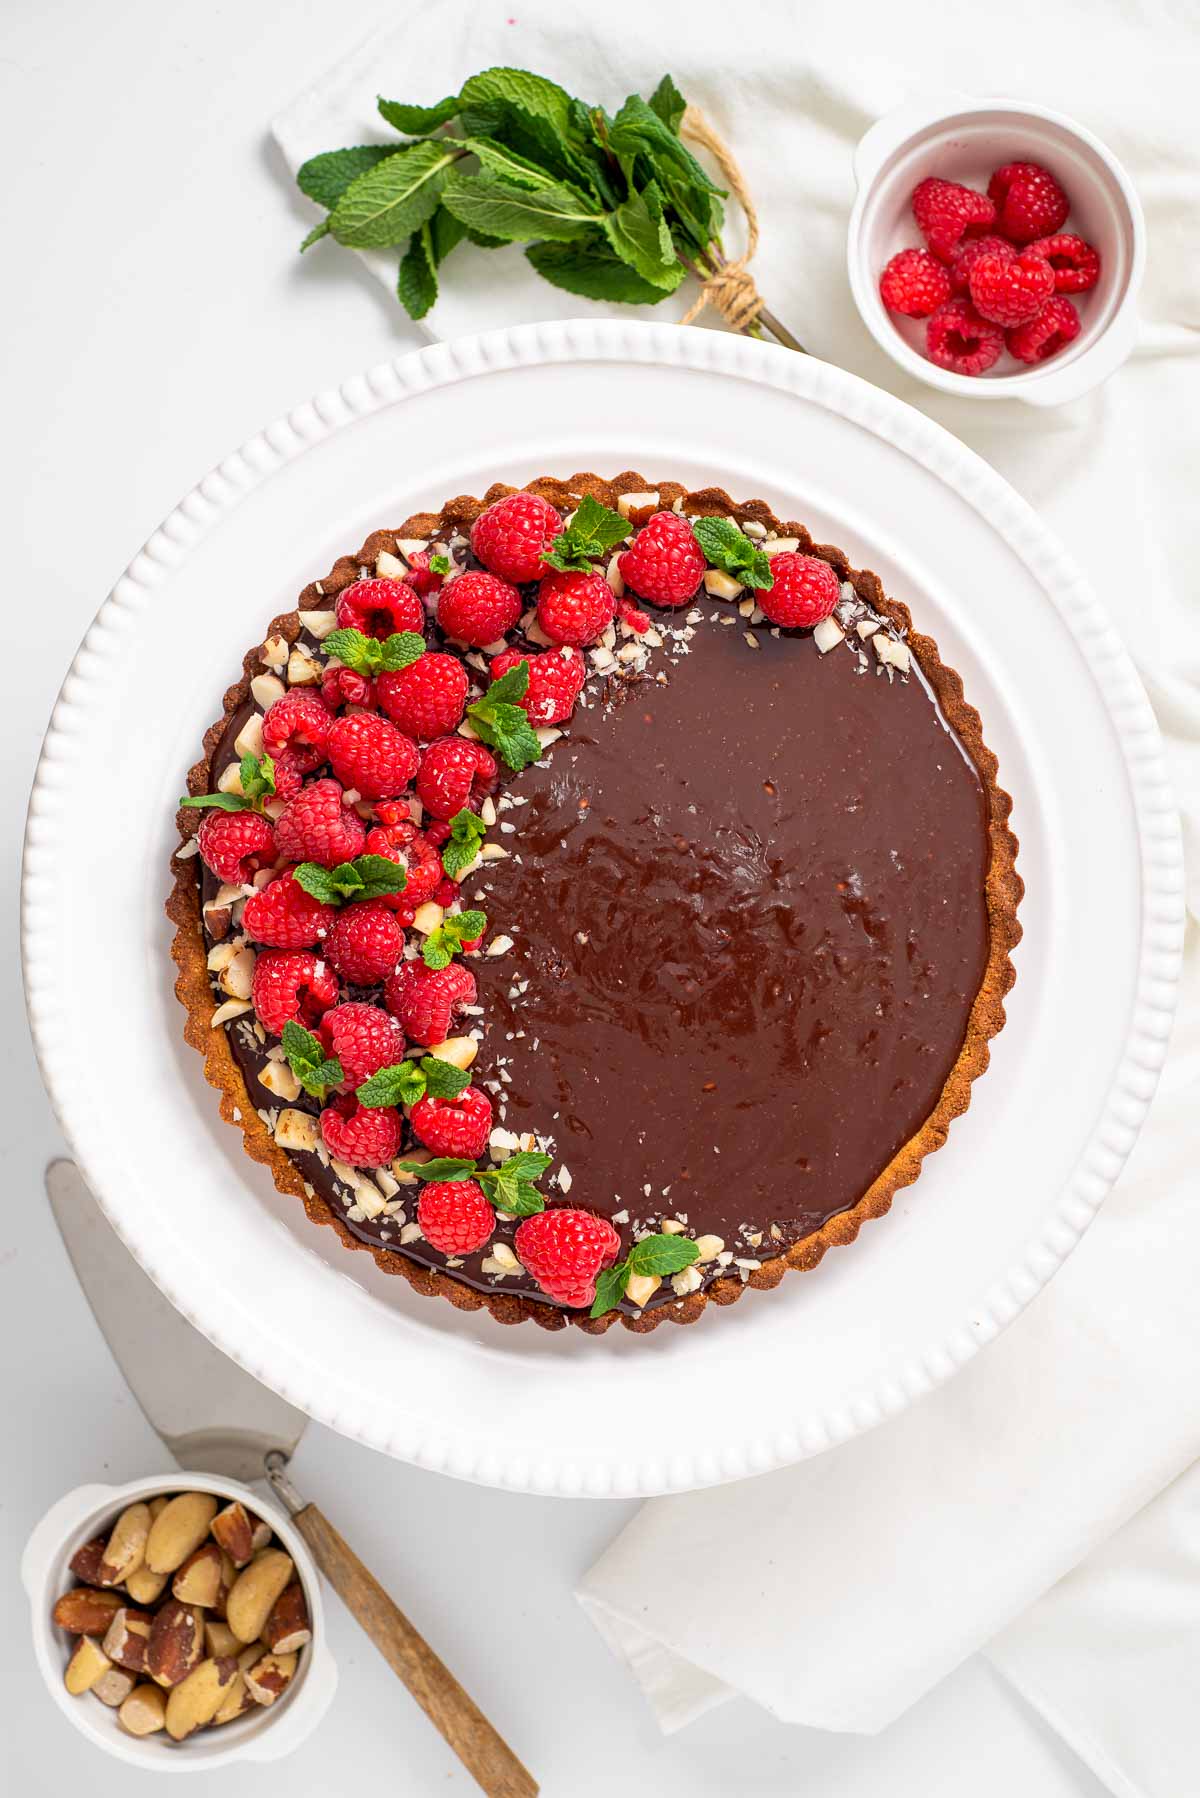 A chocolate raspberry tart taht is low carb with a bowl of berries in the background.